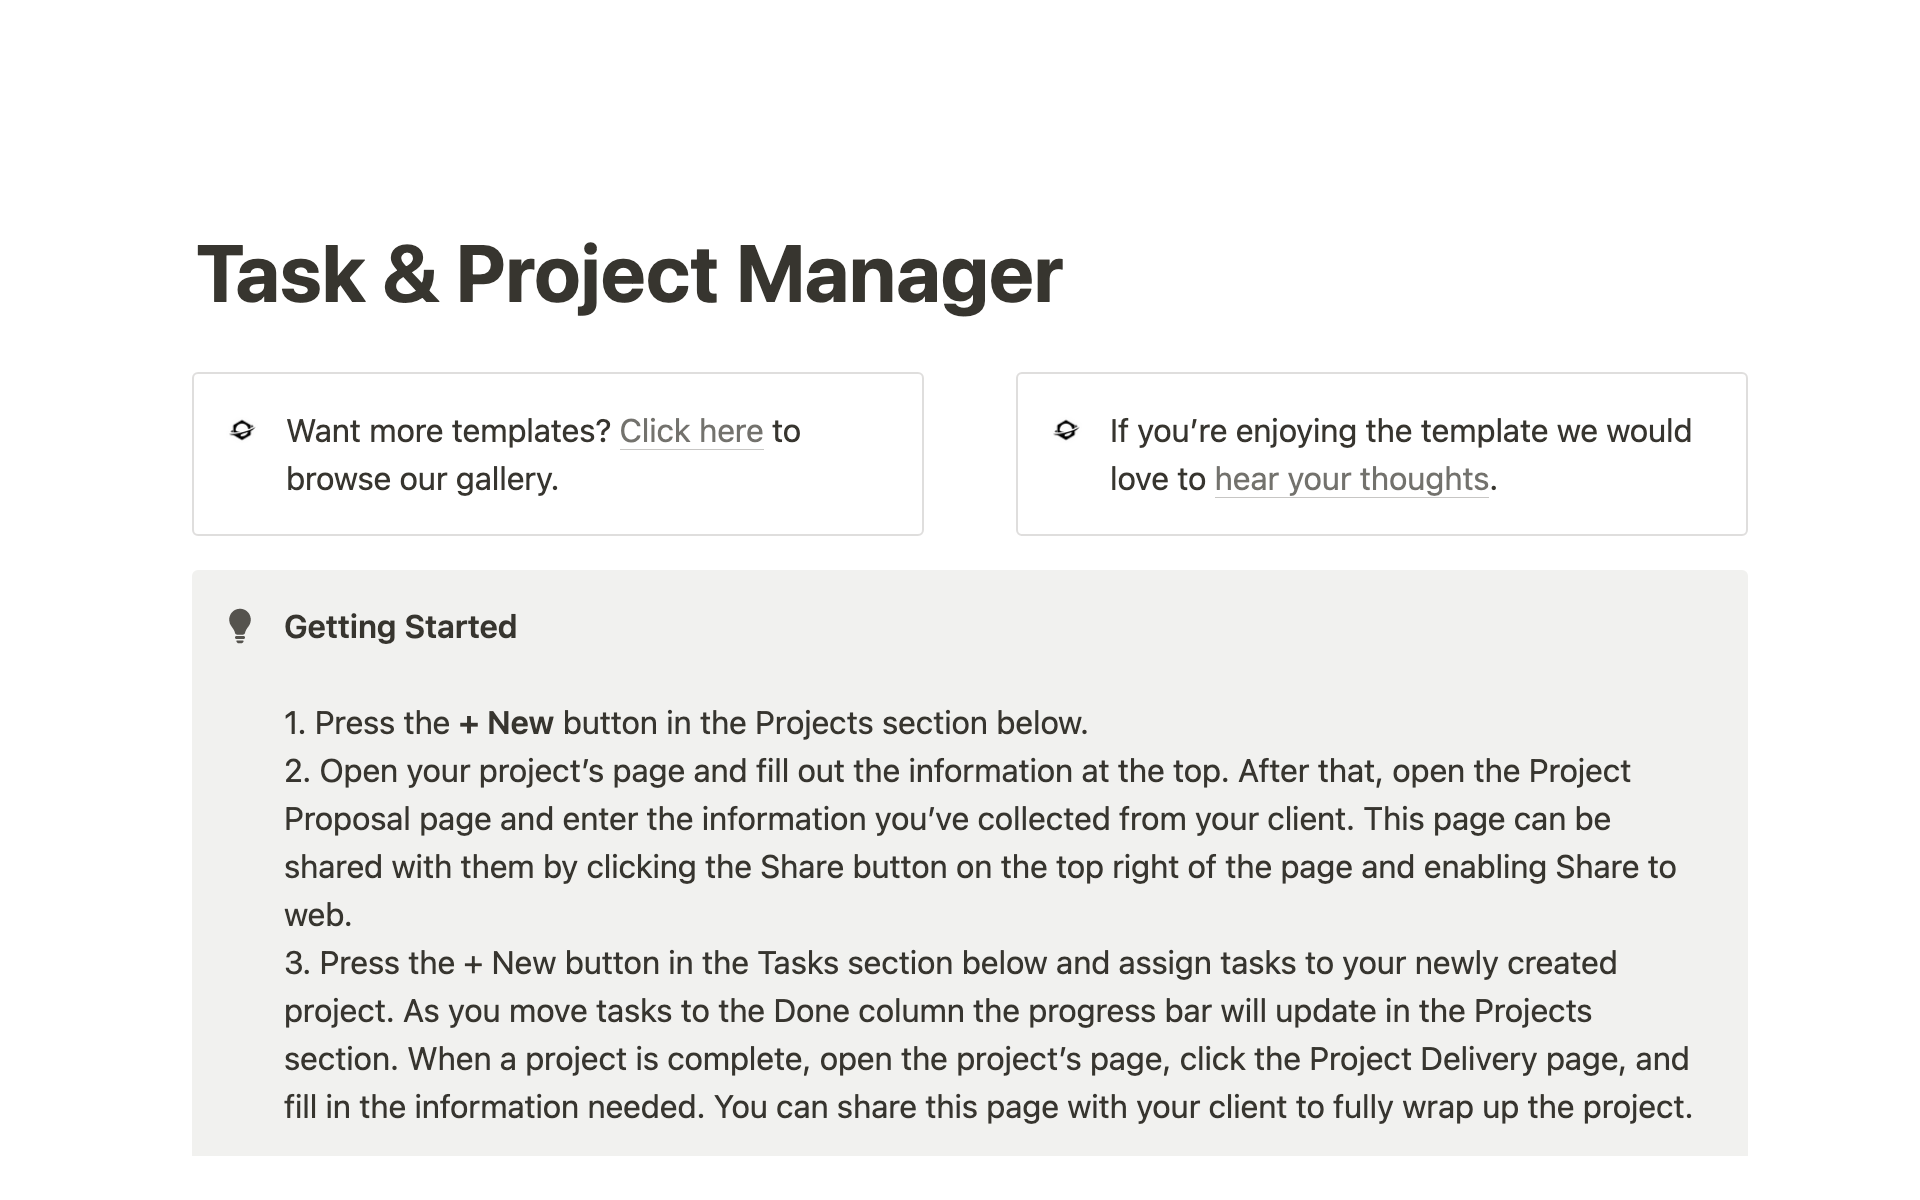 Manage your tasks and projects with Notion.